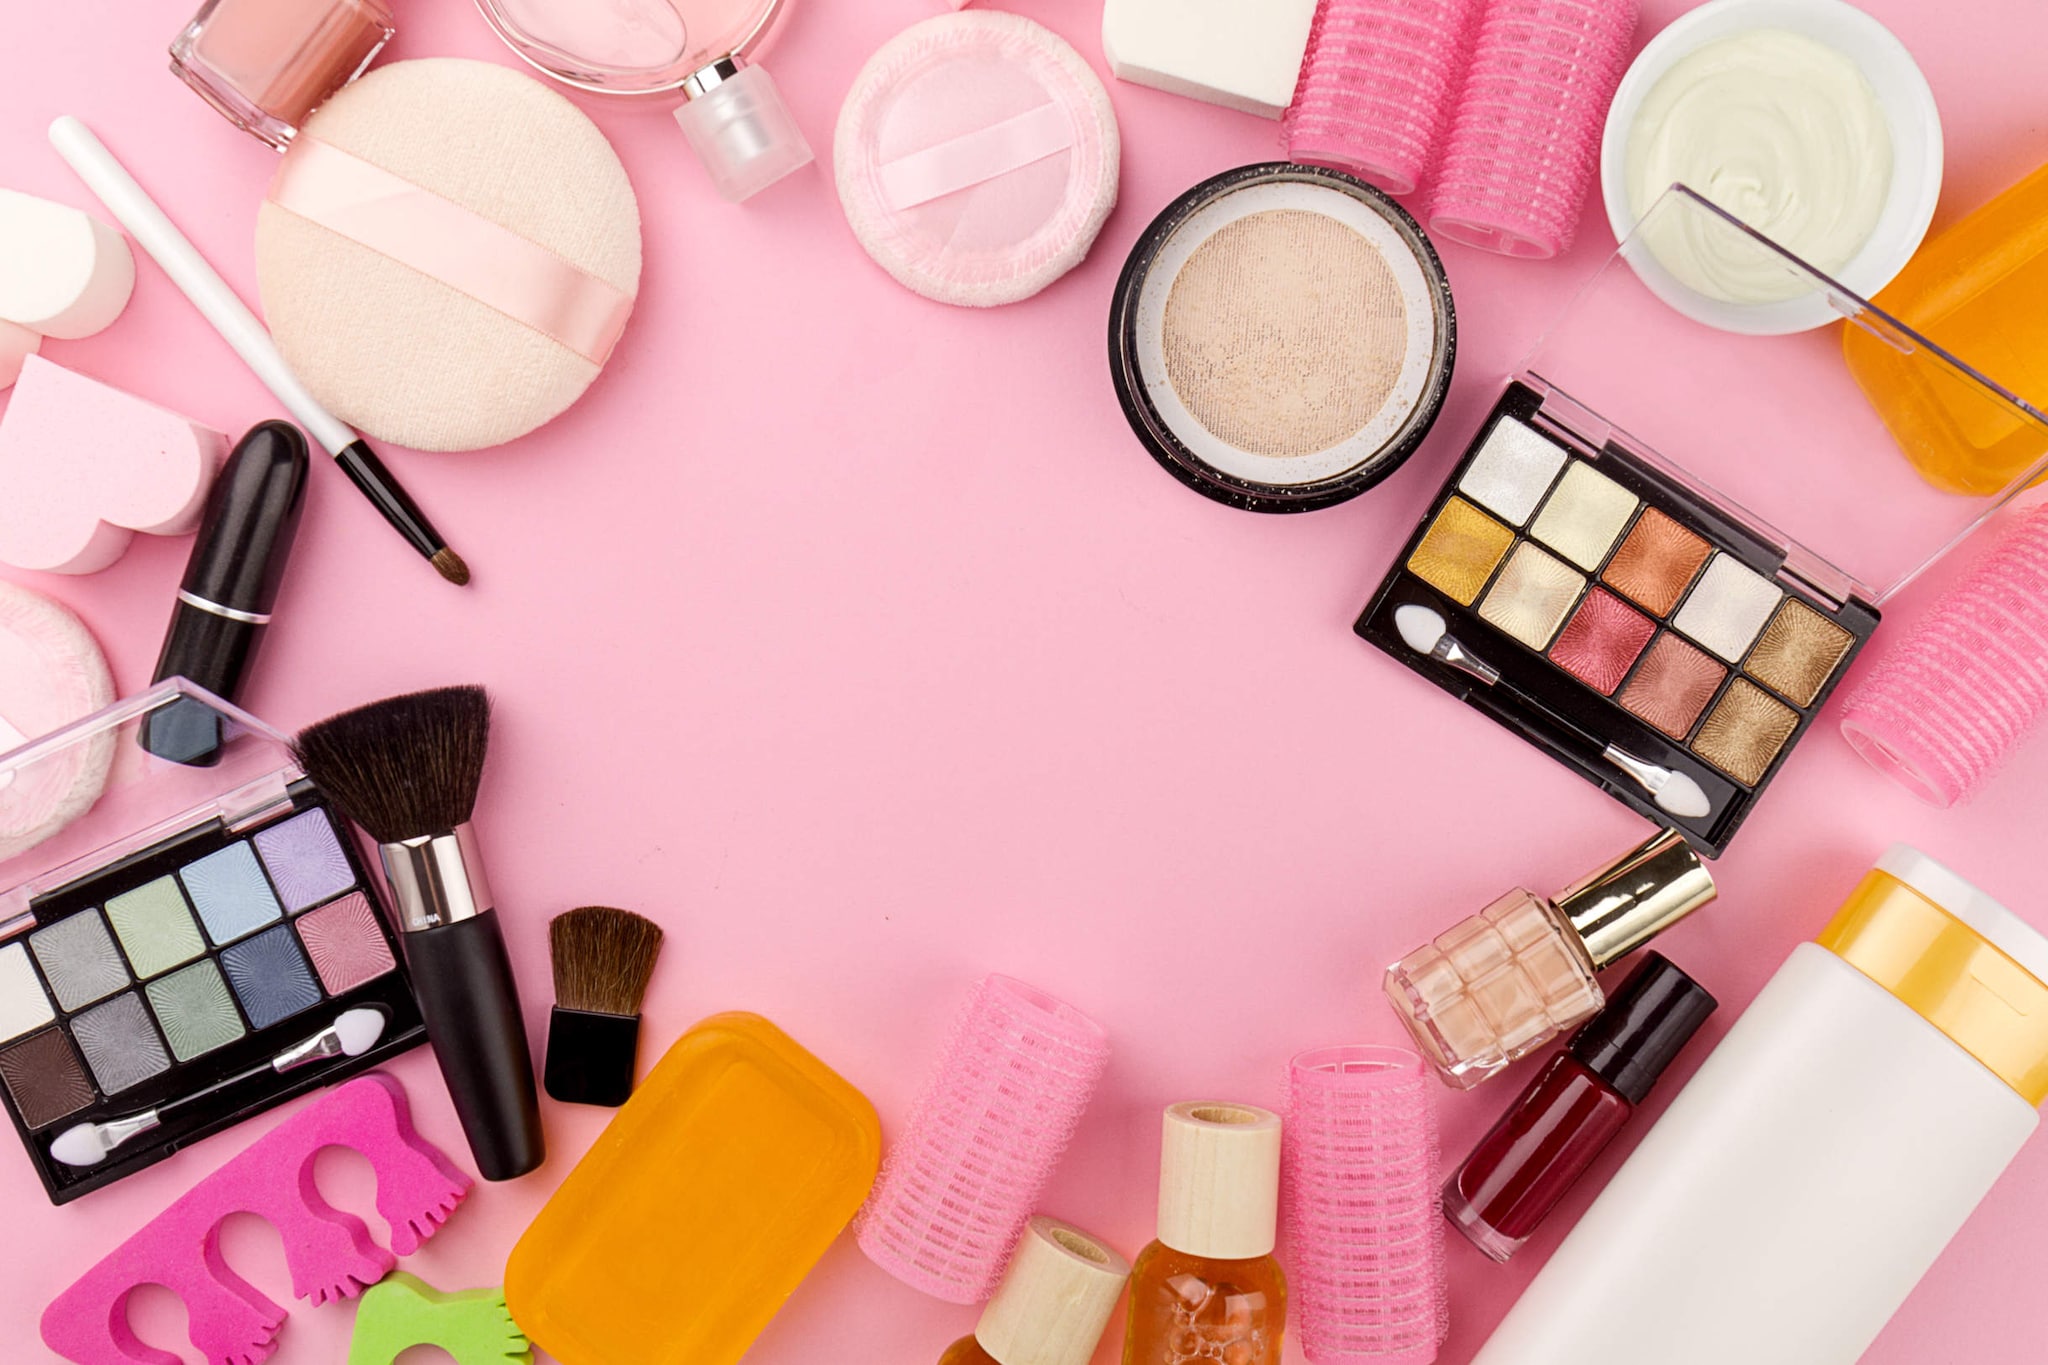 How to select safe cosmetic and beauty products online